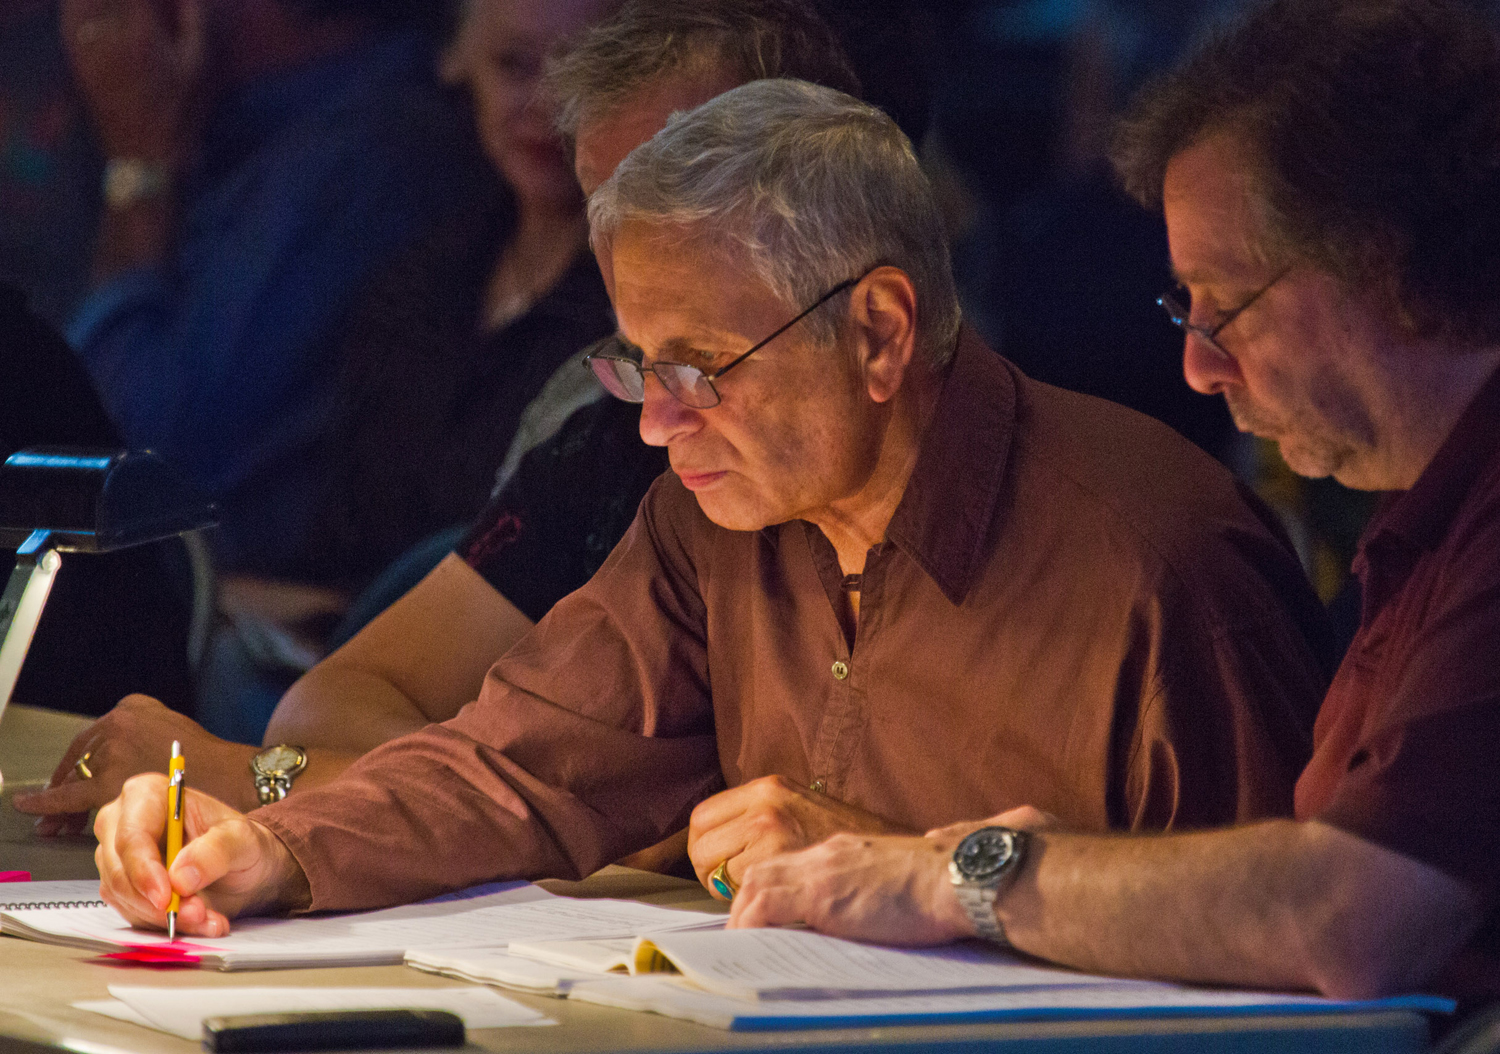 Composer John Corigliano in rehearsal for his Piano Concerto, programmed in honor of his 80th birth year.